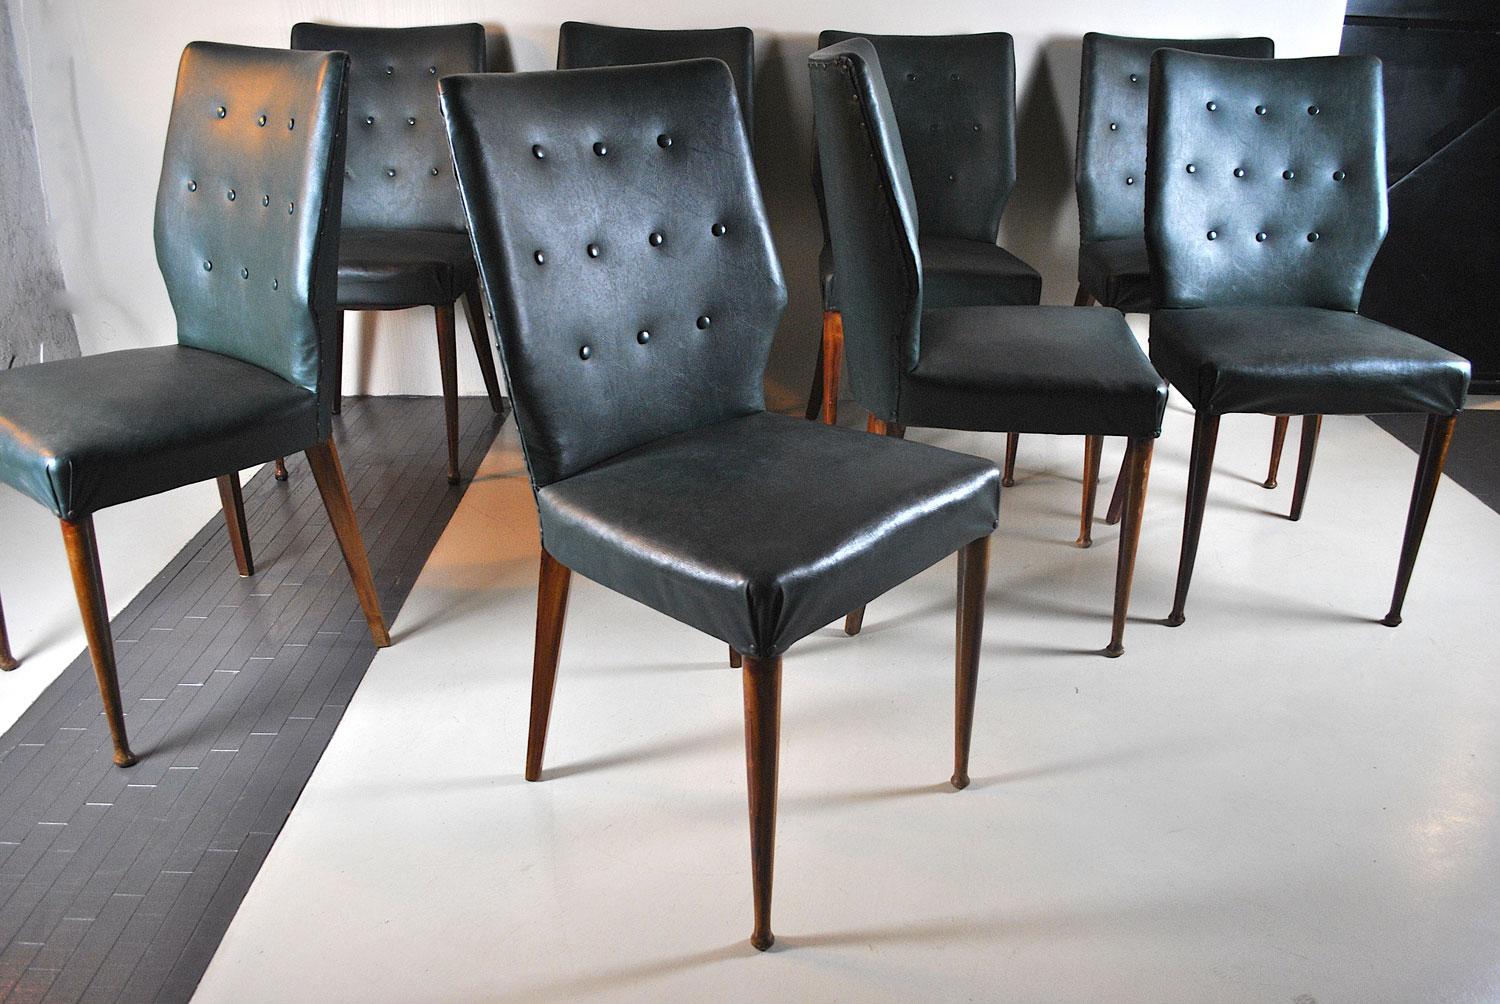 Italian Midcentury Set of Eighty 1960s Chairs in Green Faux Leather For Sale 2